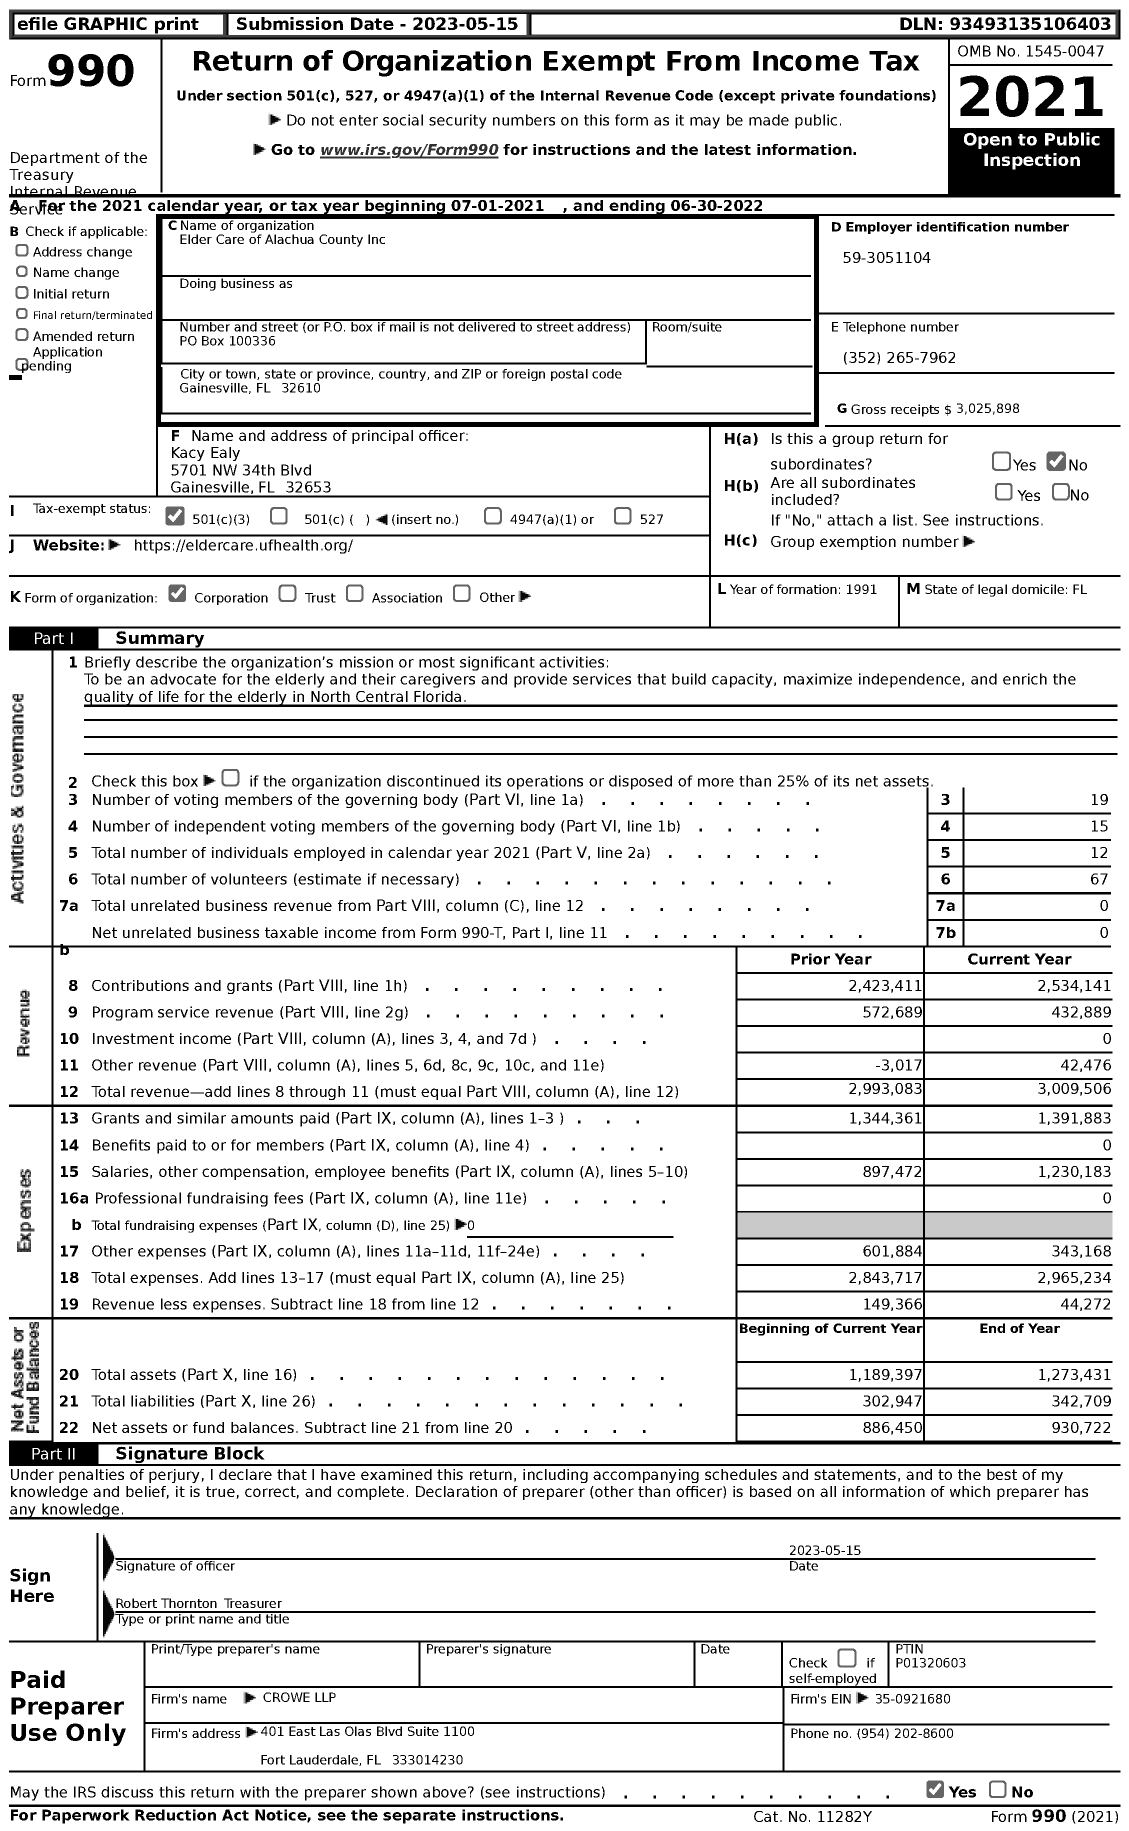 Image of first page of 2021 Form 990 for Elder Care of Alachua County